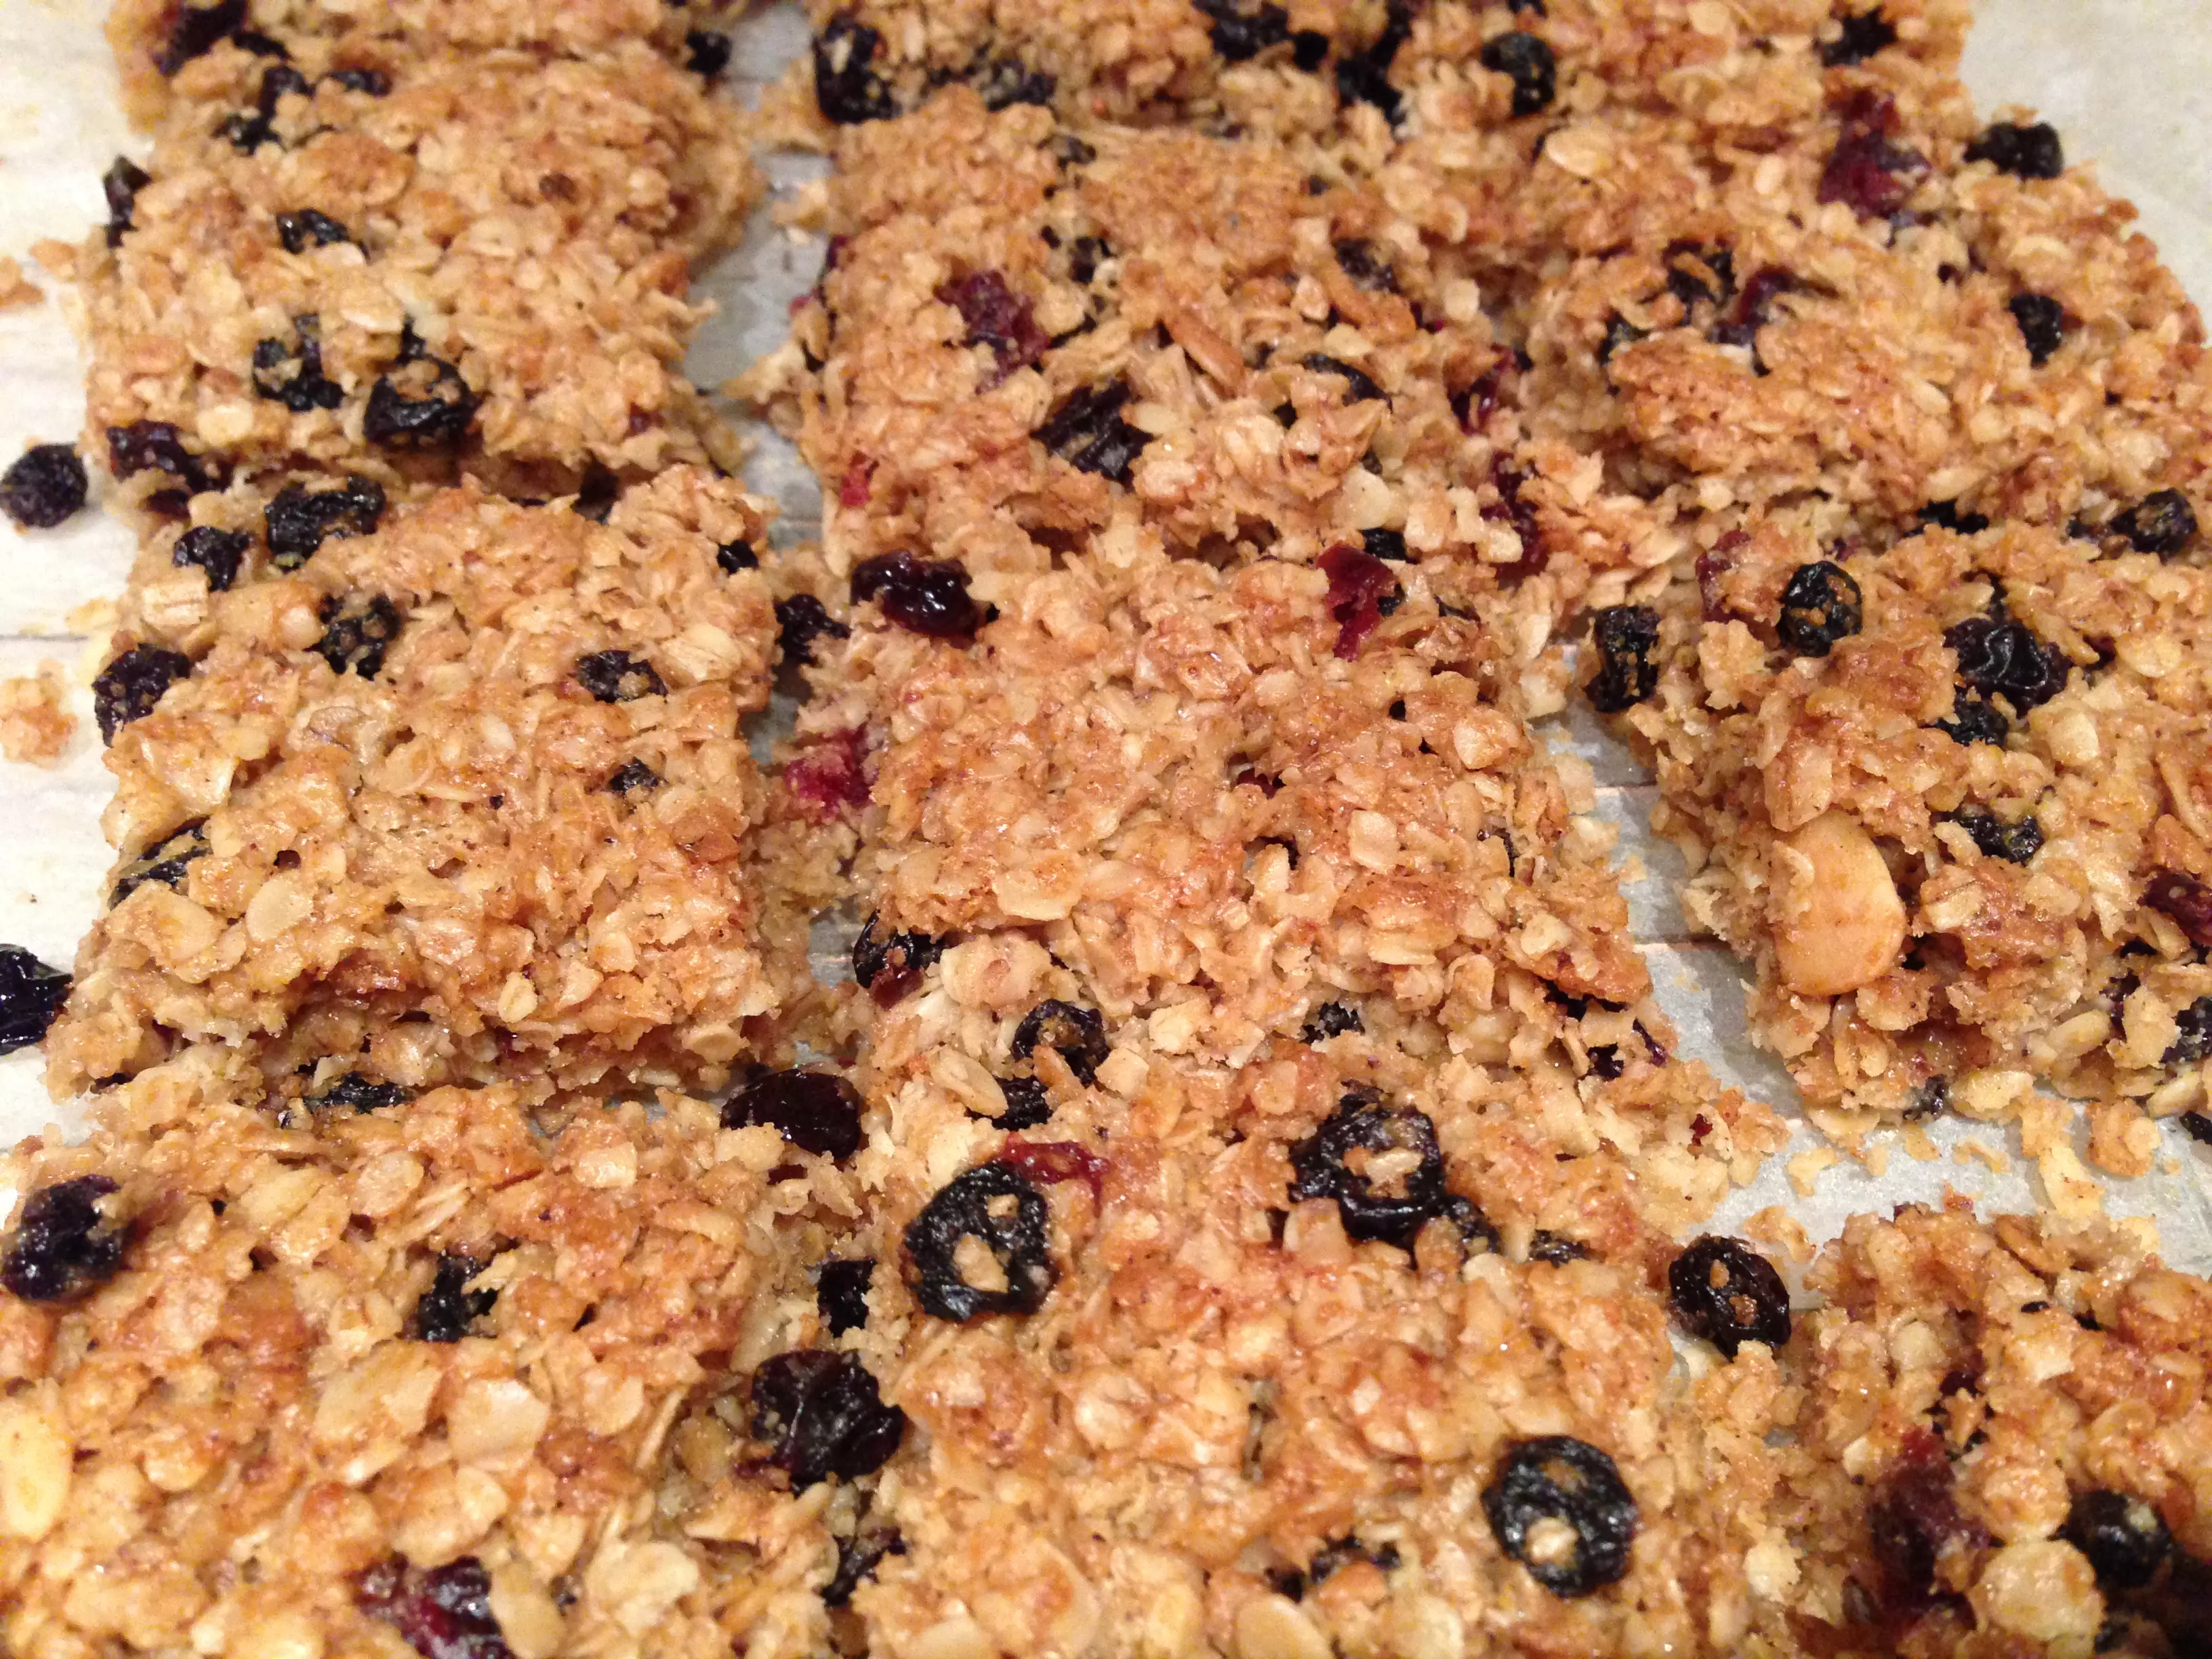 Recipe for oat flapjacks with dried fruit